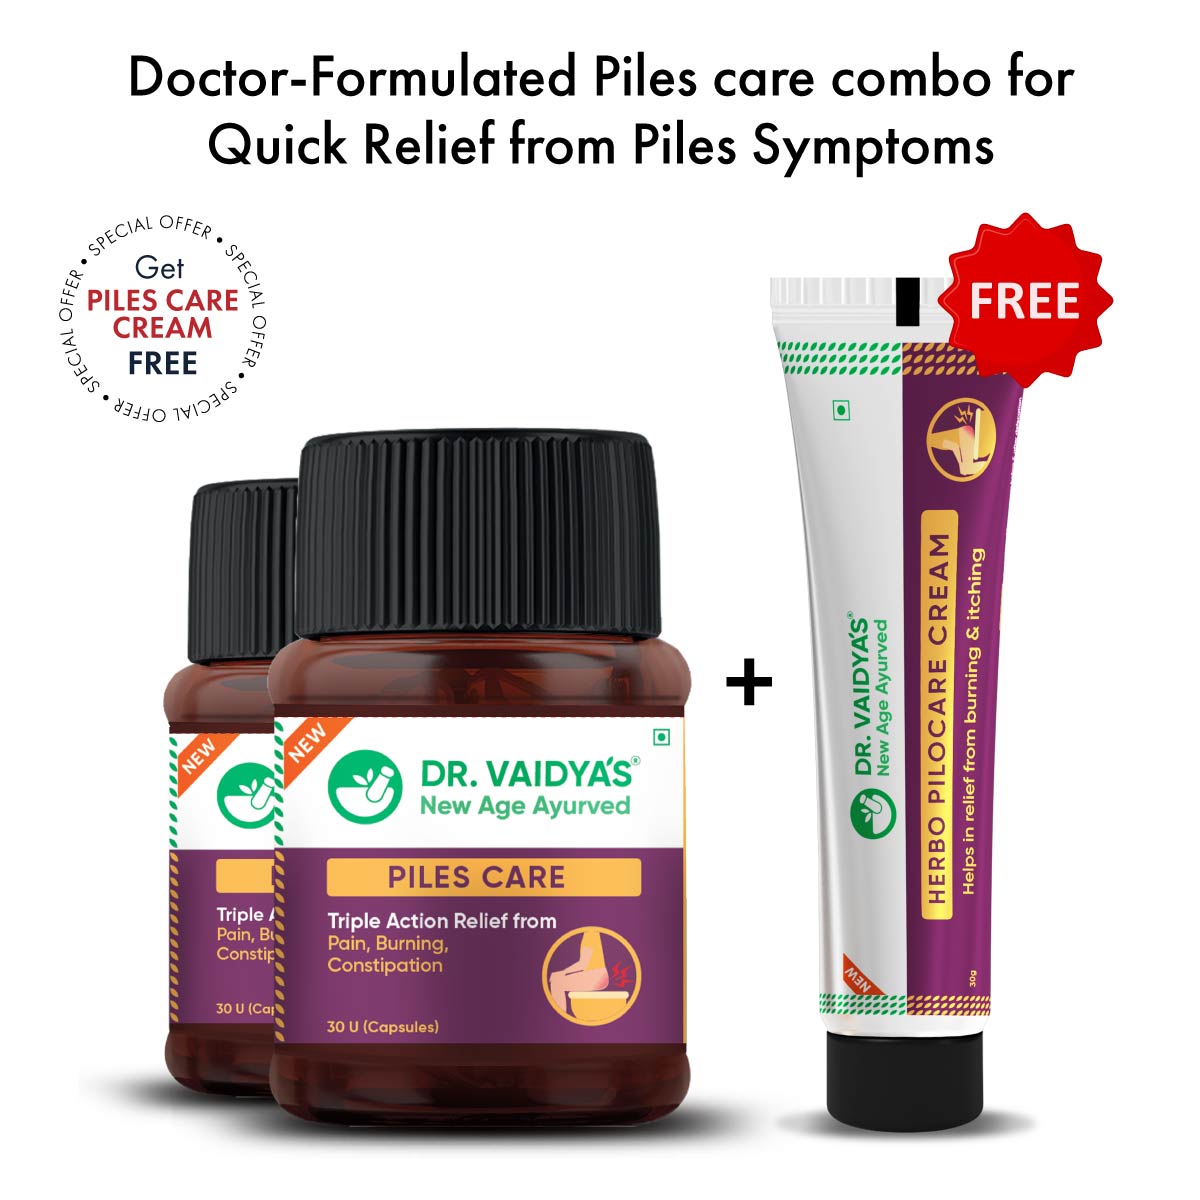 Piles Care Combo: For Managing Piles Naturally